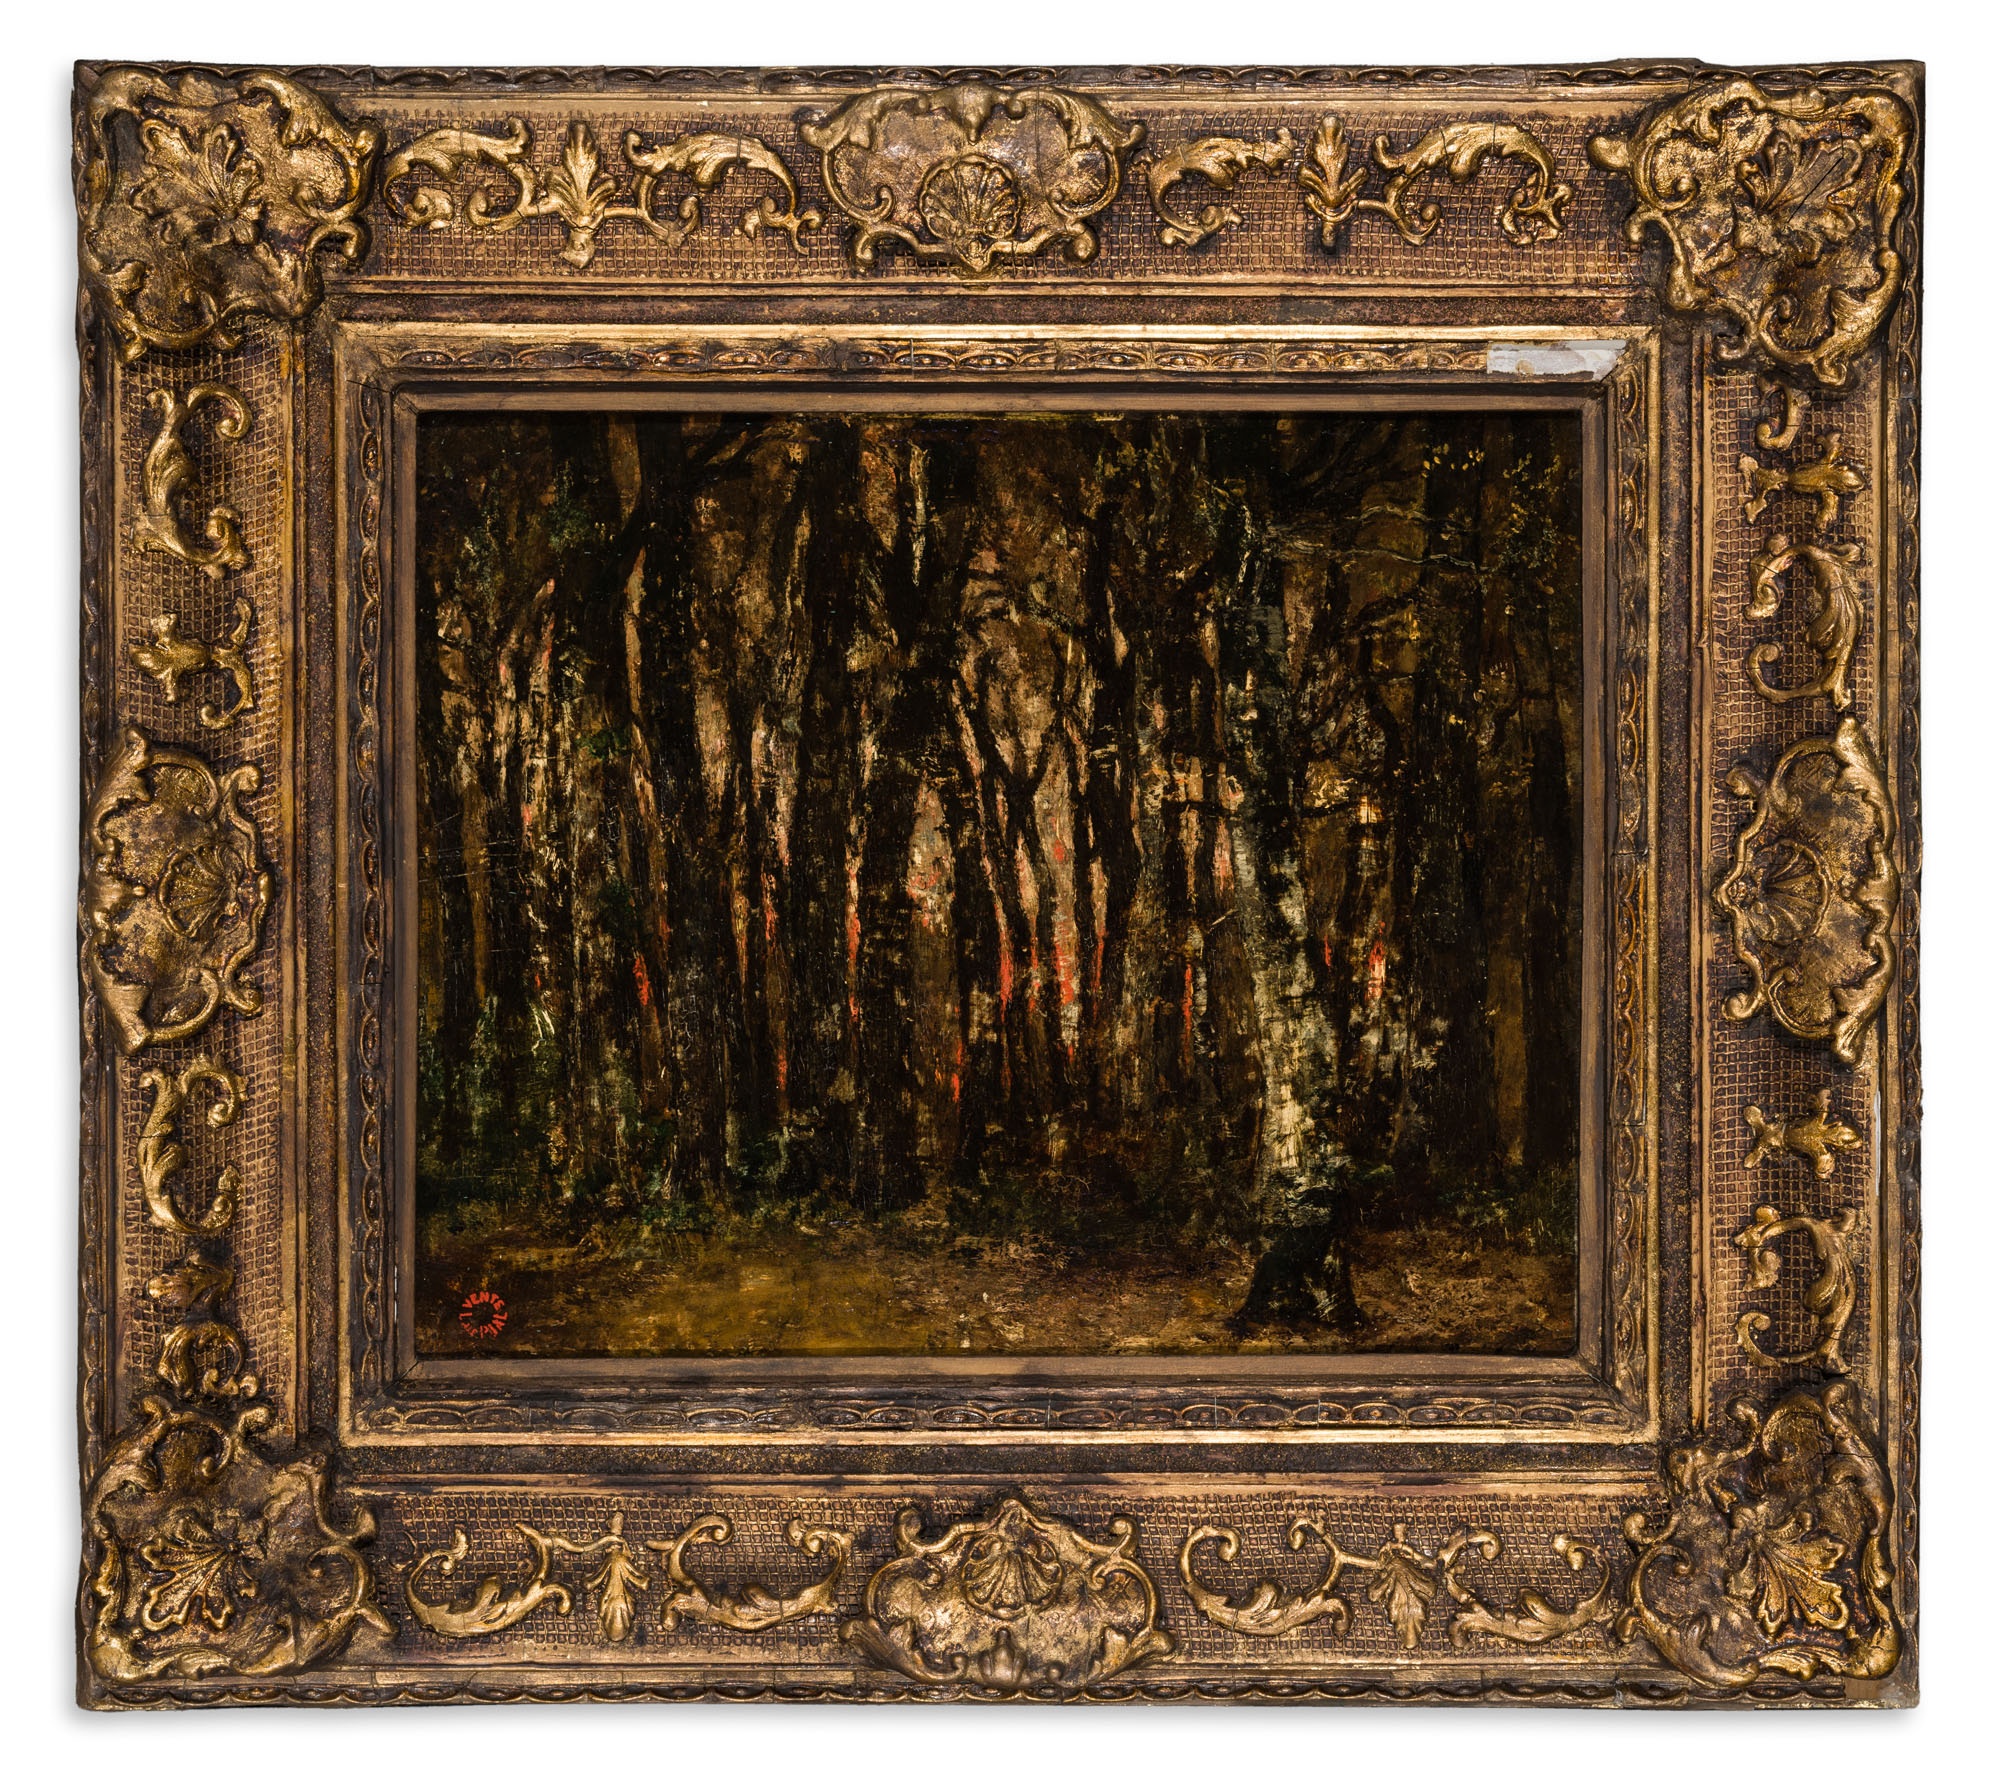 László Paál: untitled (known as “Sunset in the Forest” and “Sunshine in the Forest”), n.d. (1875) (The Salgo Trust for Education CC BY-NC-SA)